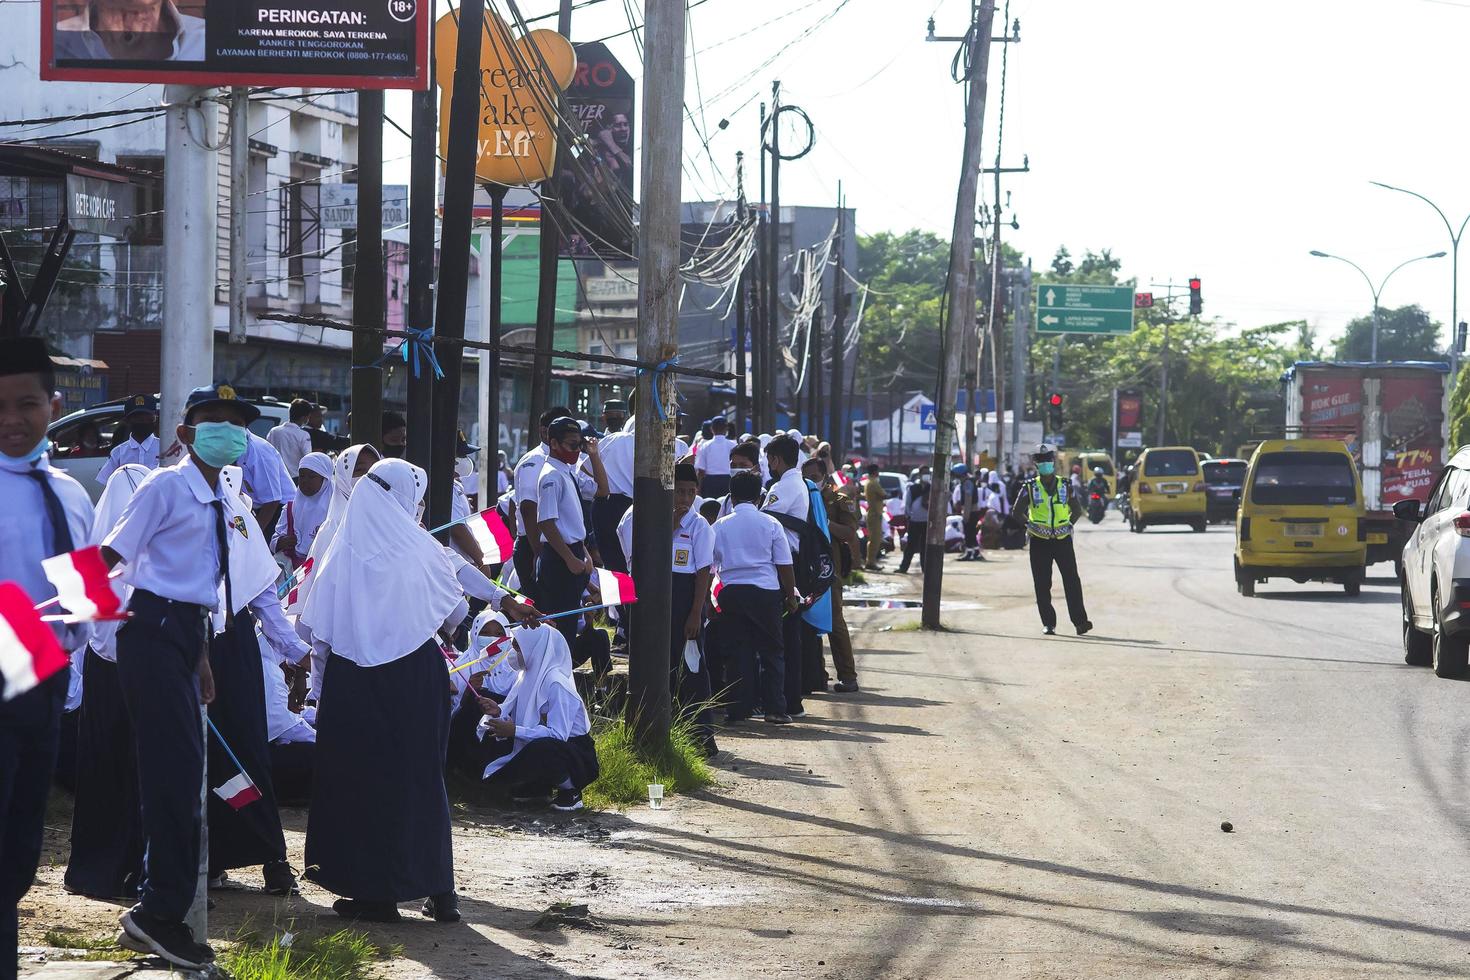 Sorong, West Papua, Indonesia, October 4th 2021. State Visit of the President of Indonesia, Joko Widodo. School children and teachers welcomed the president's arrival from the side of the road. photo